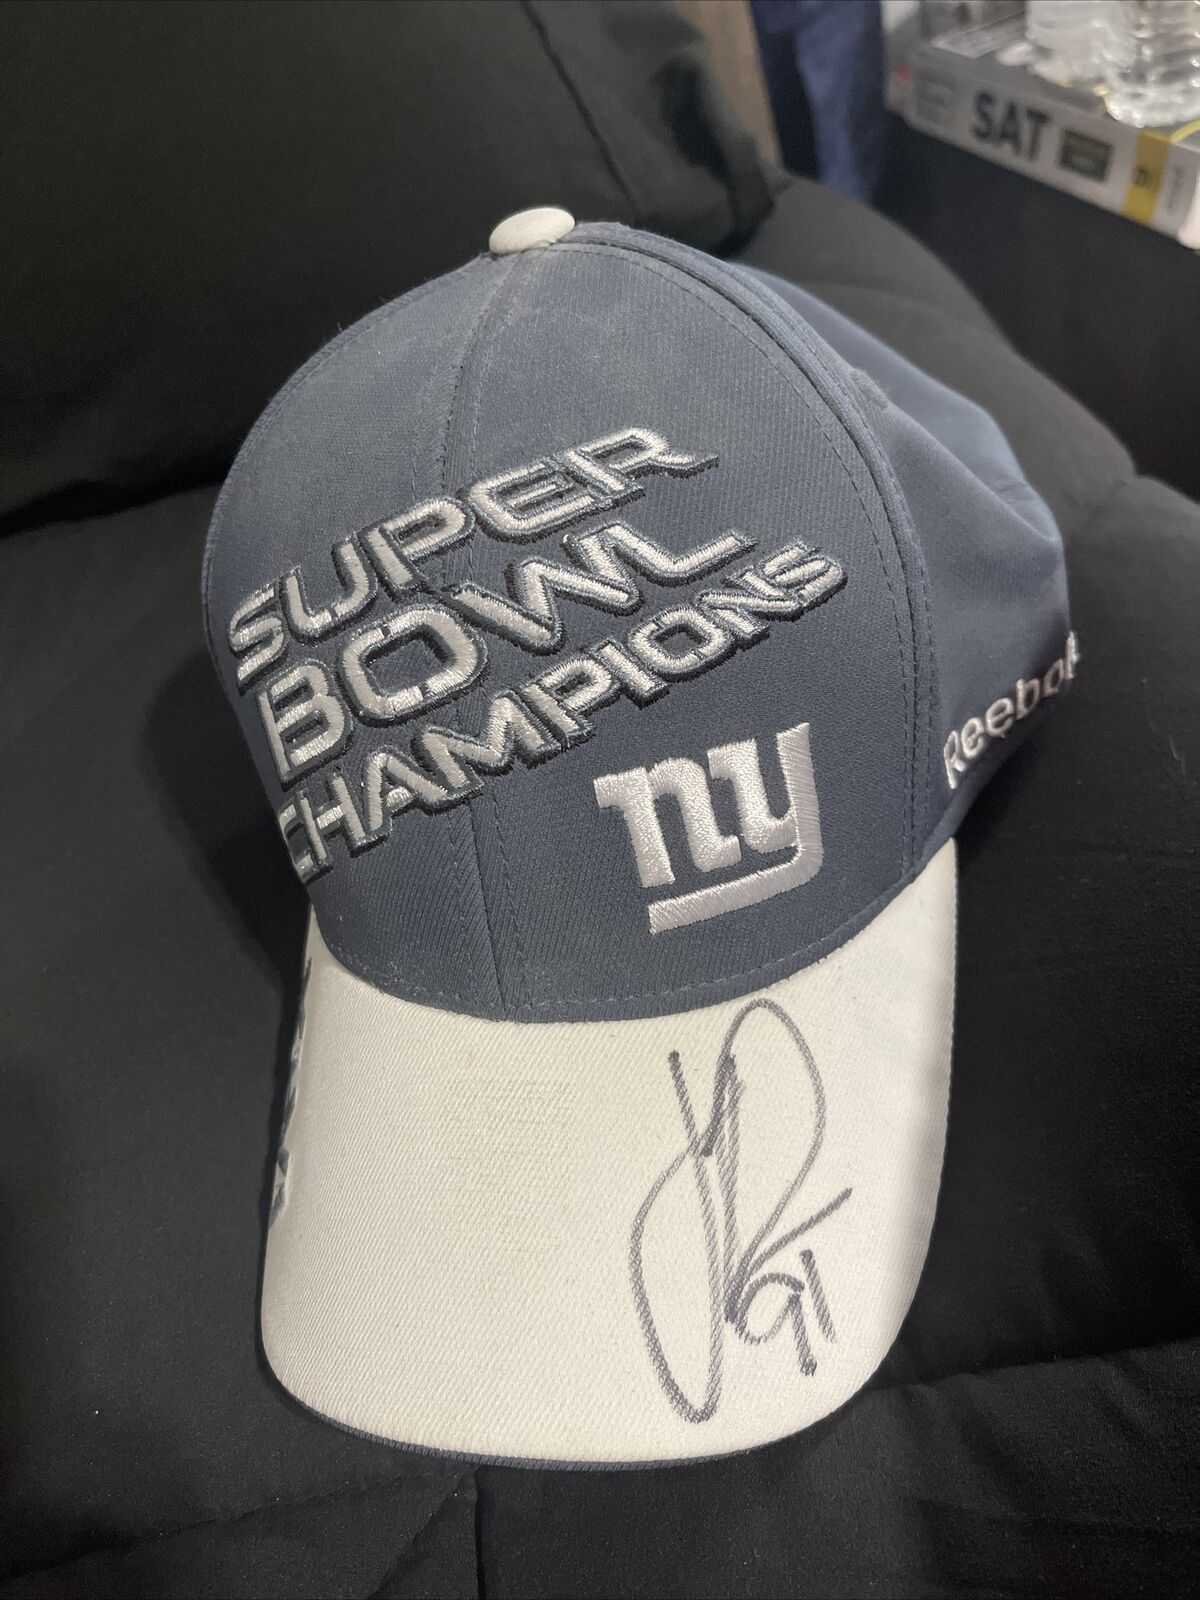 New York Giants Hat Signed By Justin Tuck